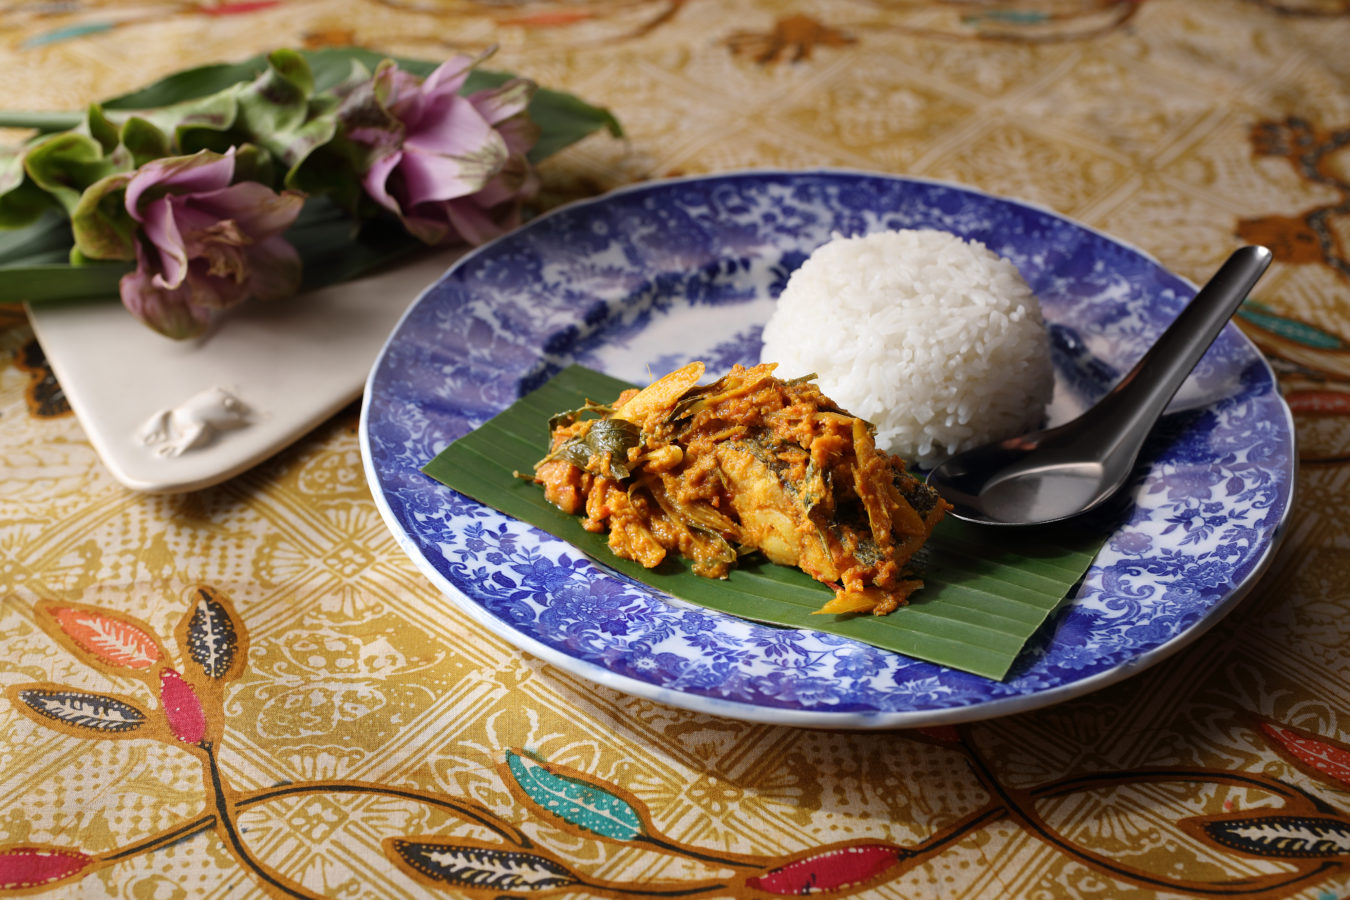 Banana Leaf Wrapped Fish with Rice